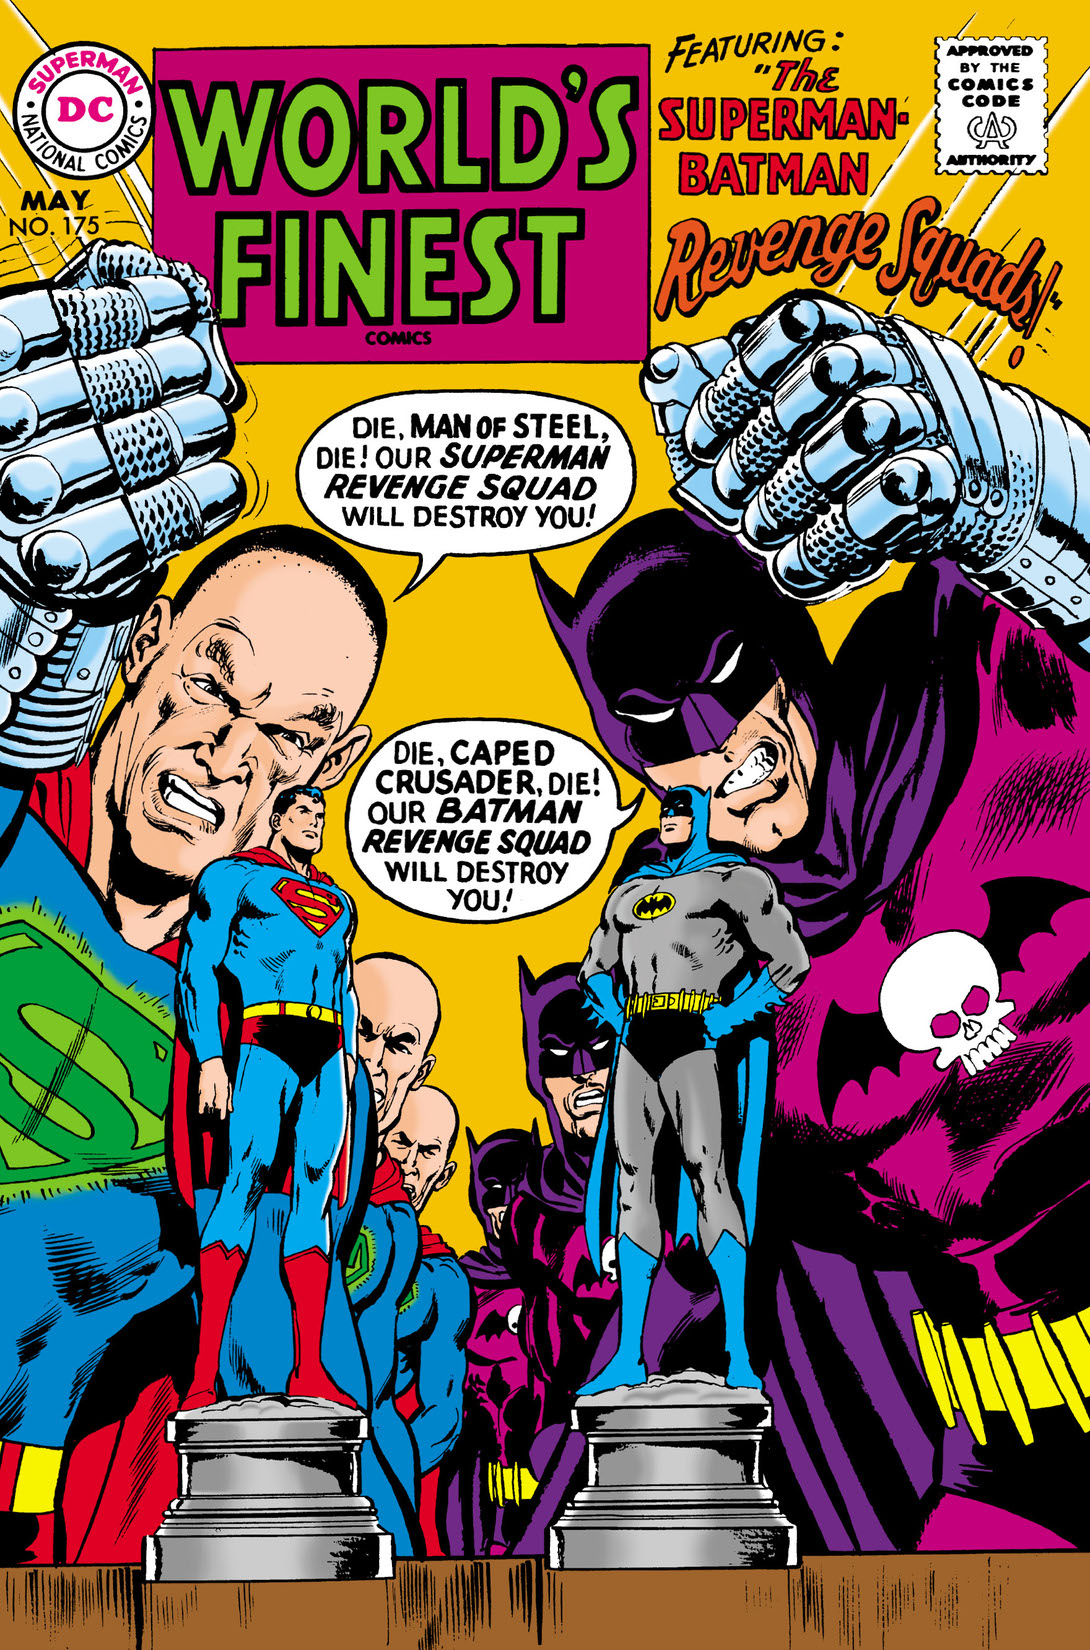 World's Finest Comics (1941-) #175 preview images